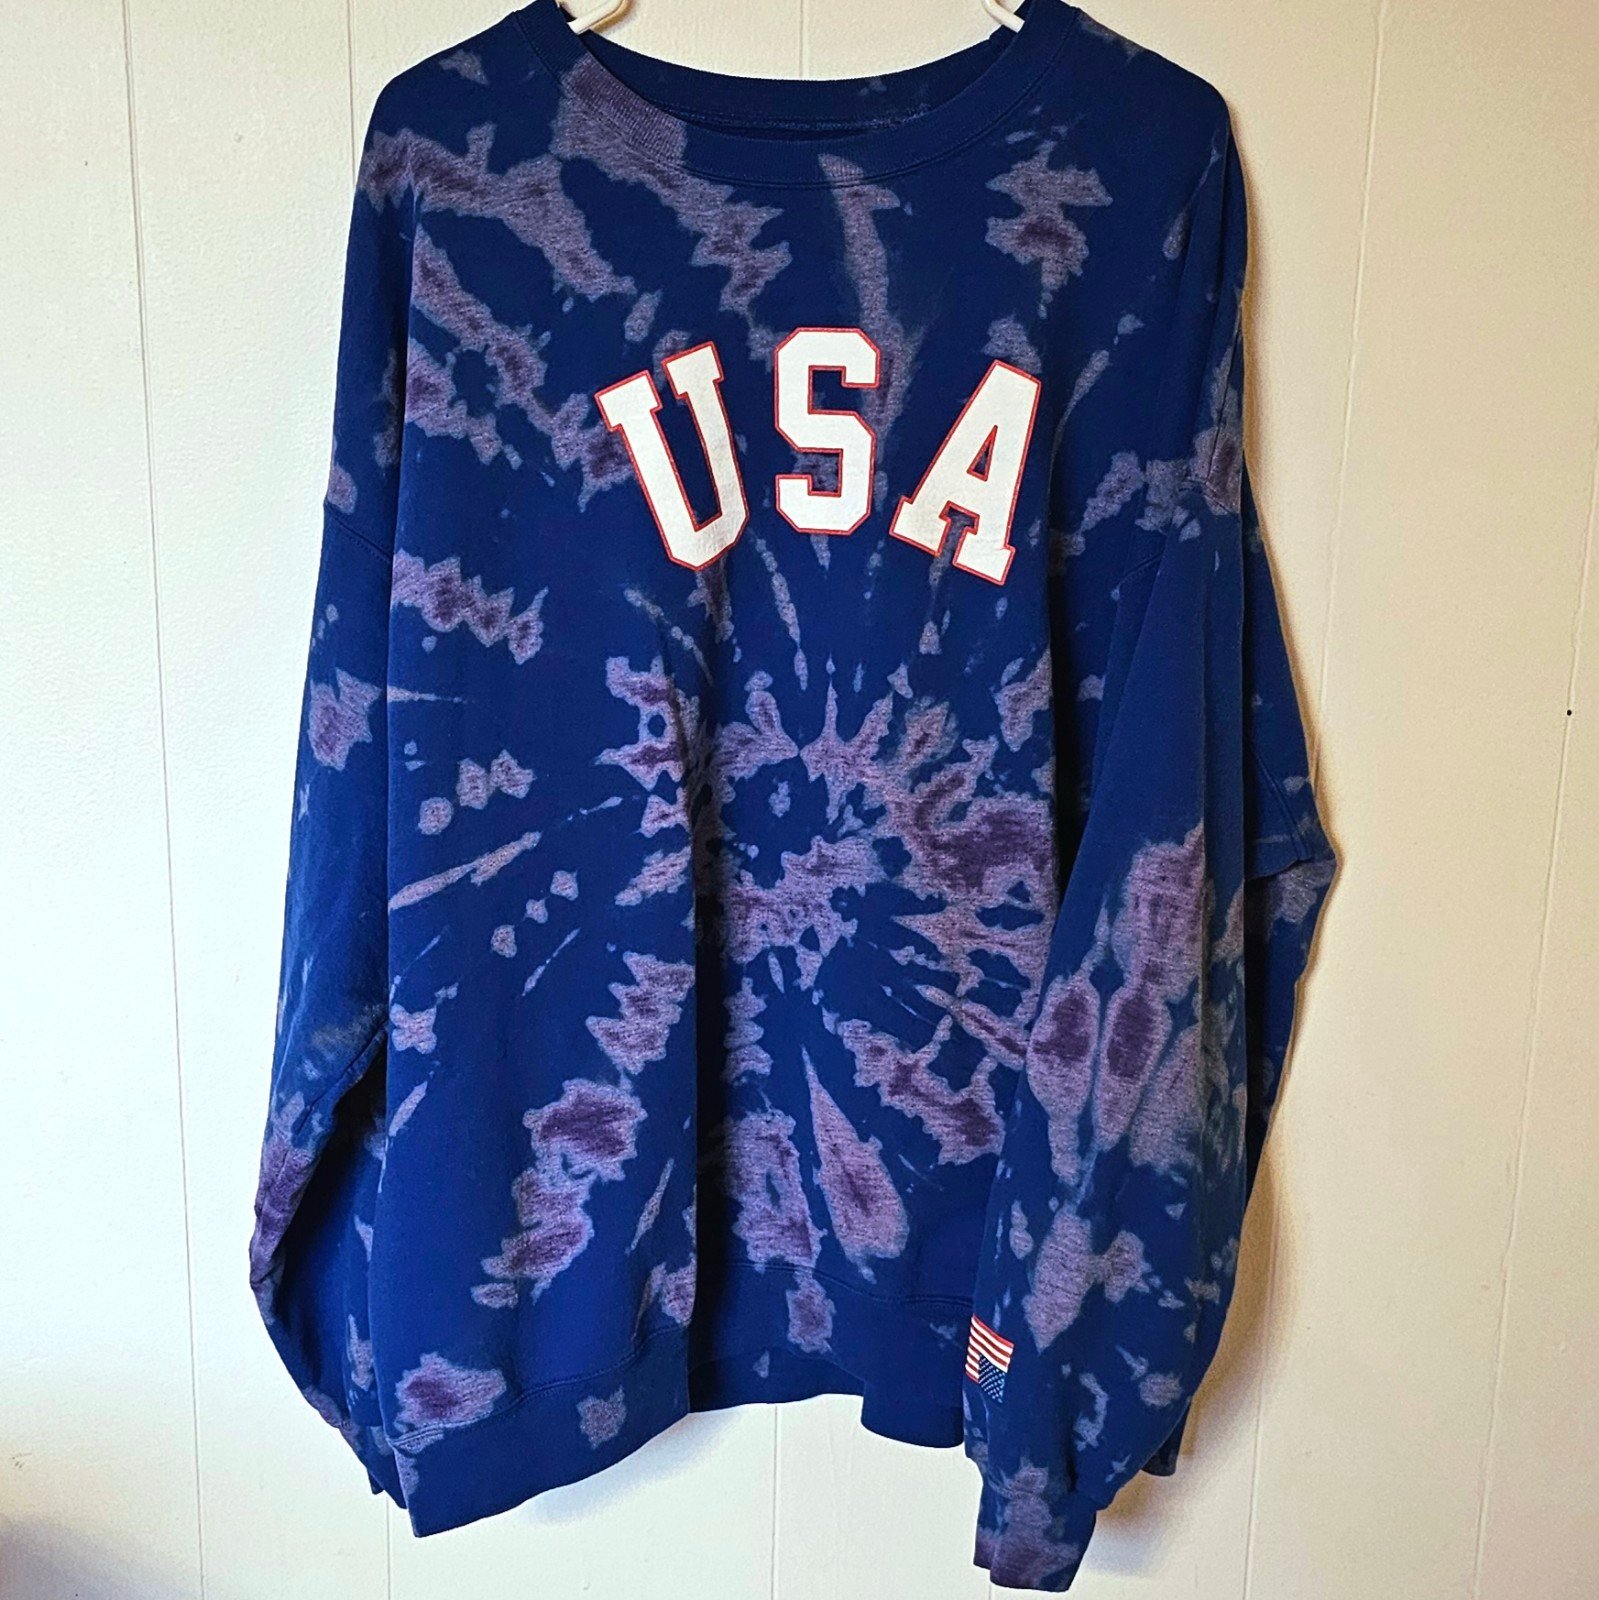 the Lowest price USA Tie-Dye Graphic Sweatshirt gsRJTB25b US Outlet